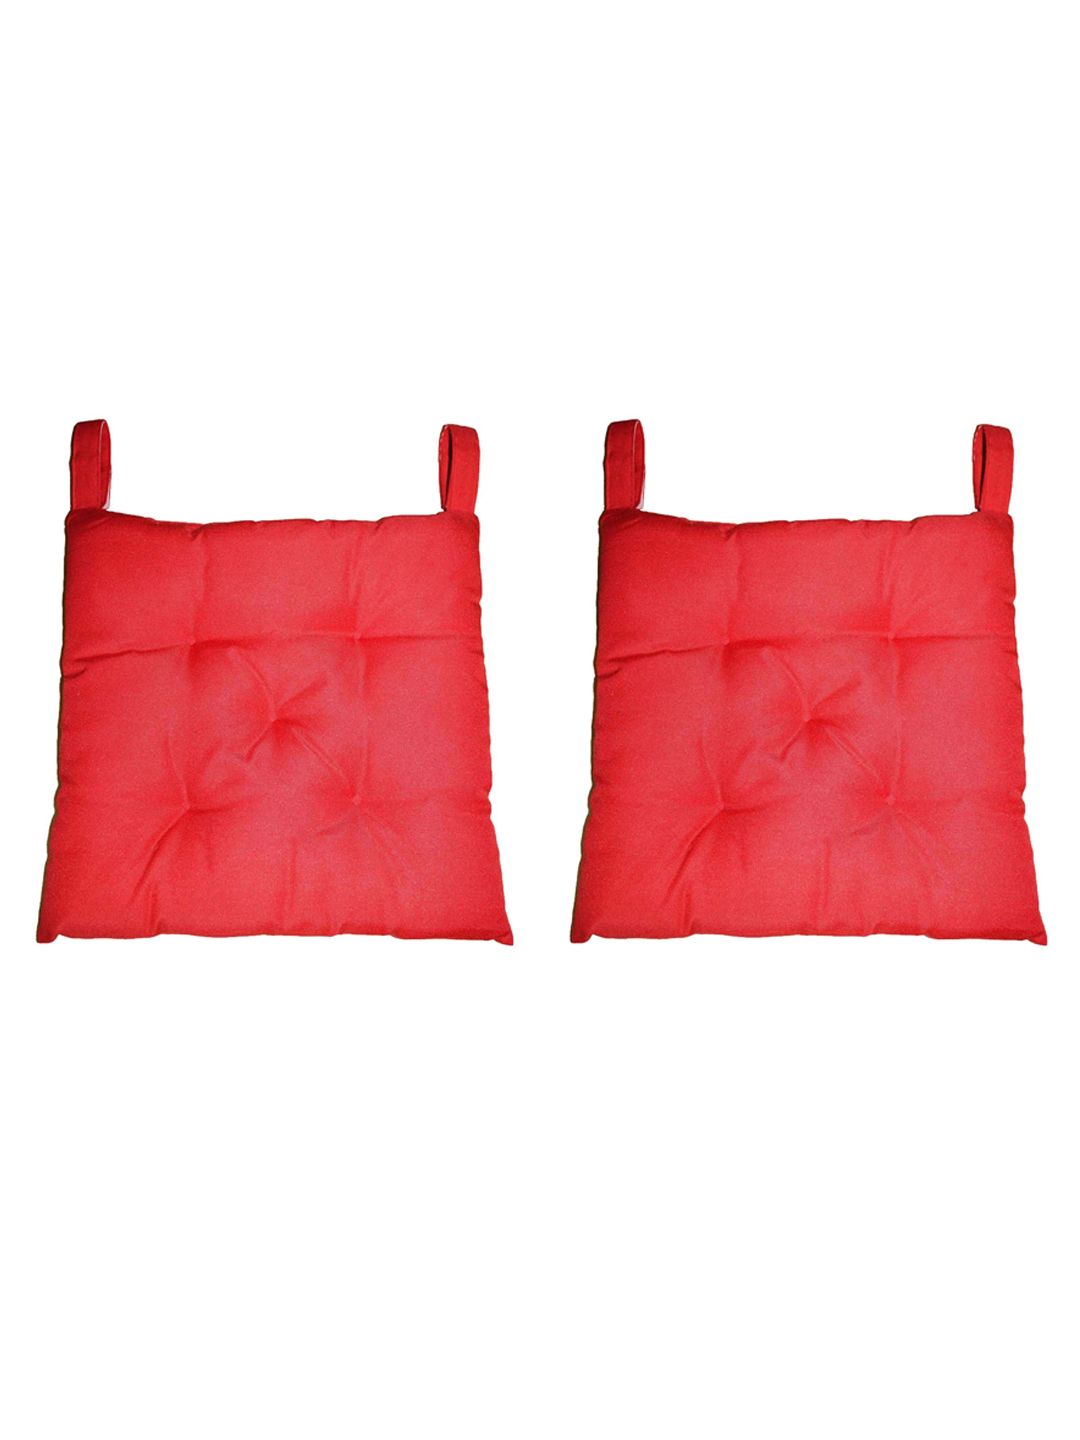 Lushomes Pack of 2 Red Solid Water Resistant Chair Cushion Price in India